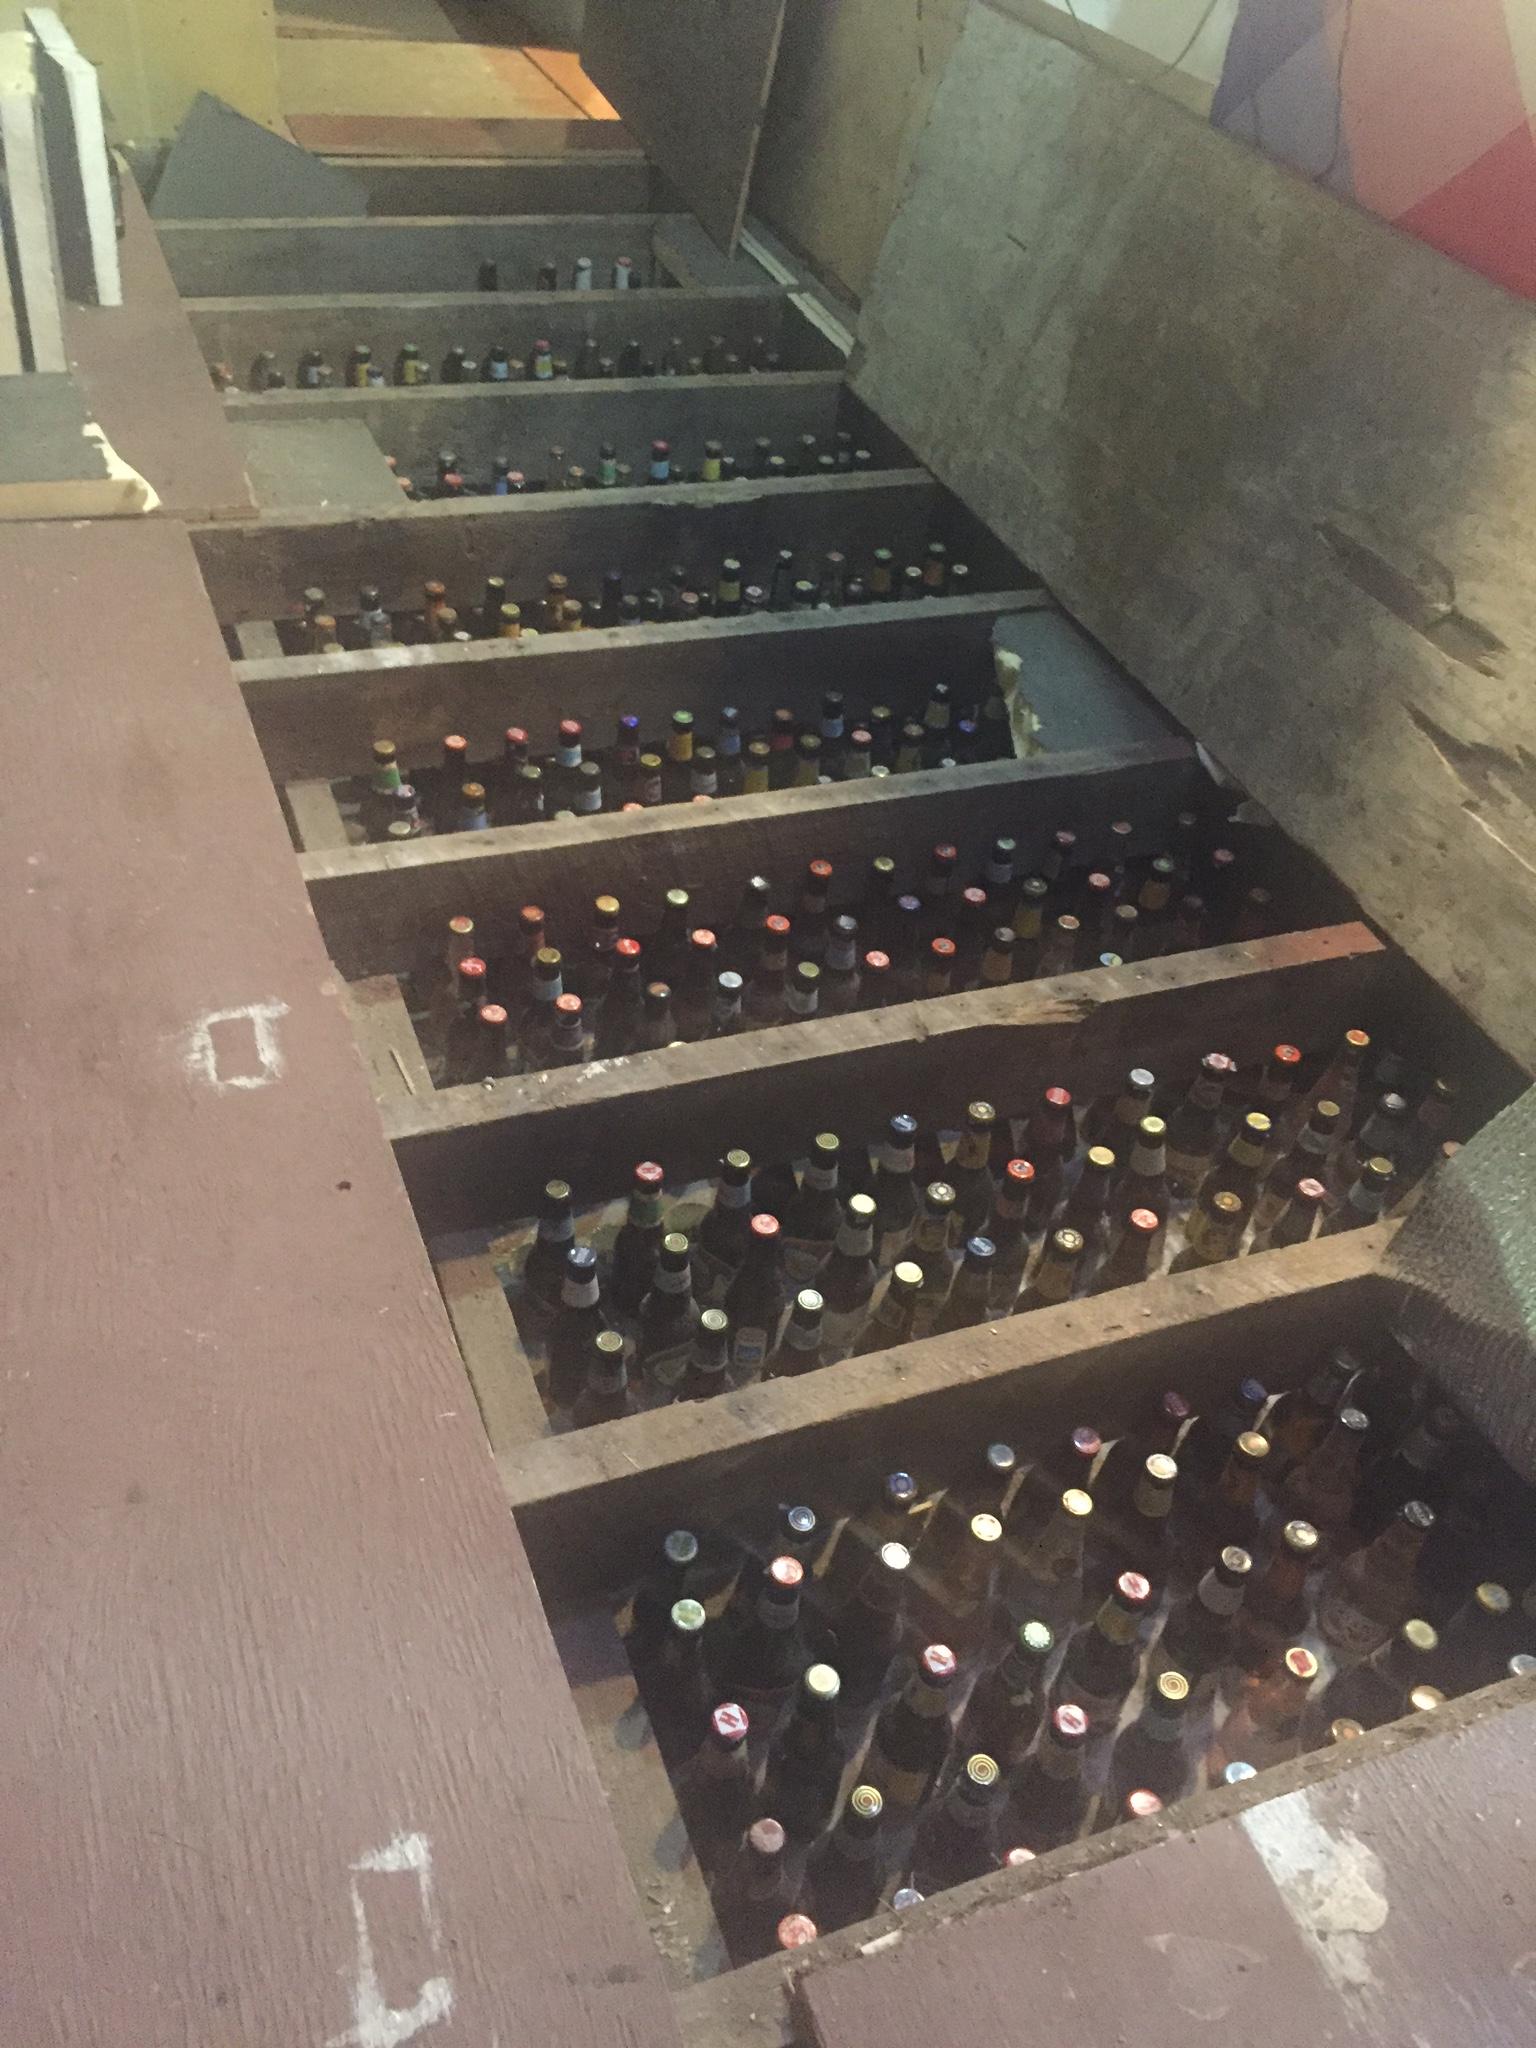 This guy's uncle recently bought a few acres and a "house" up the mountains. Trying to renovate the shack they discovered lots of beer bottles under the floor boards.